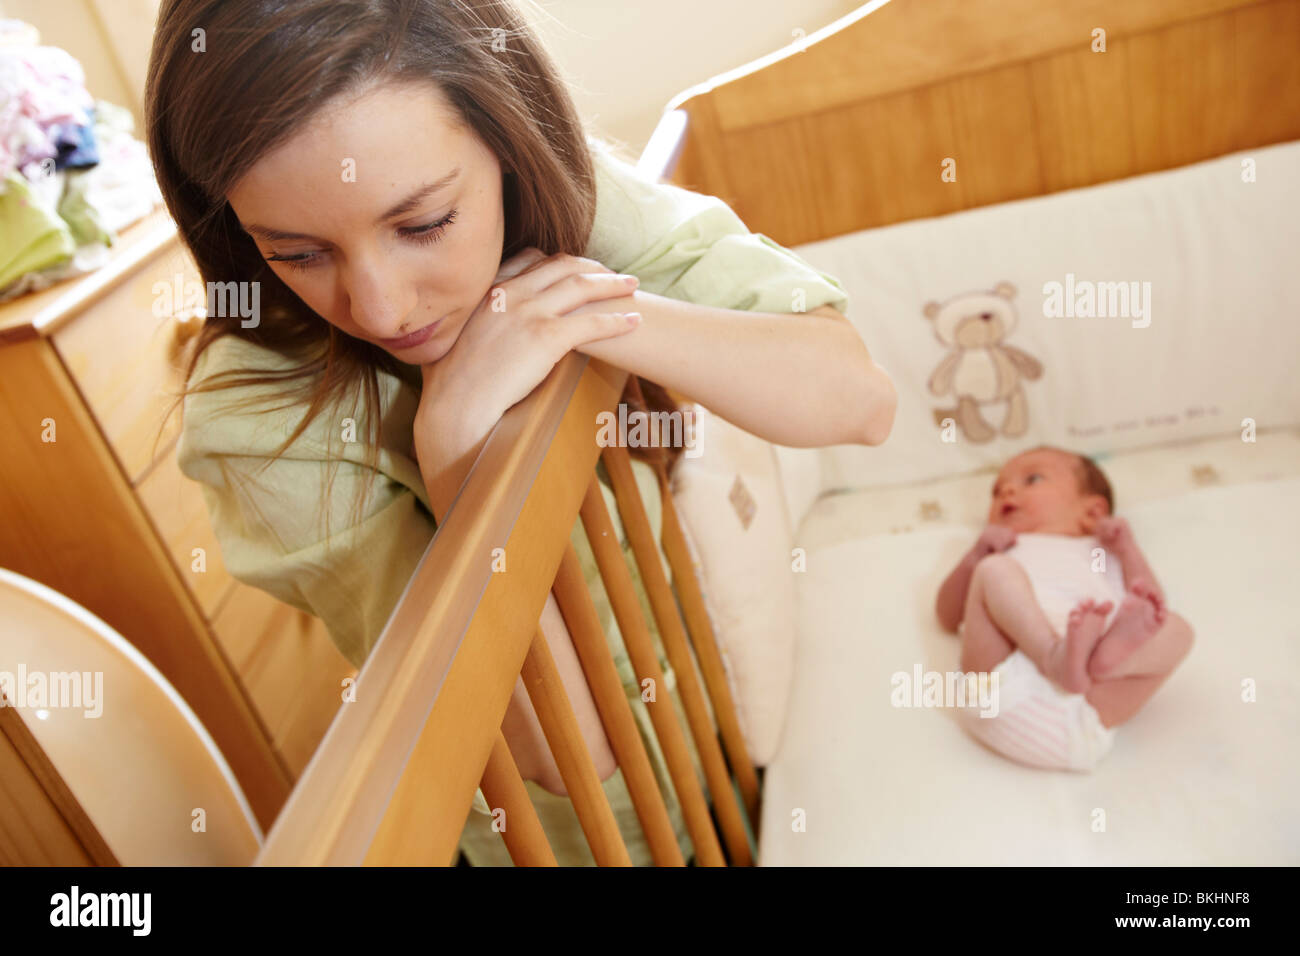 Woman alone with baby Stock Photo